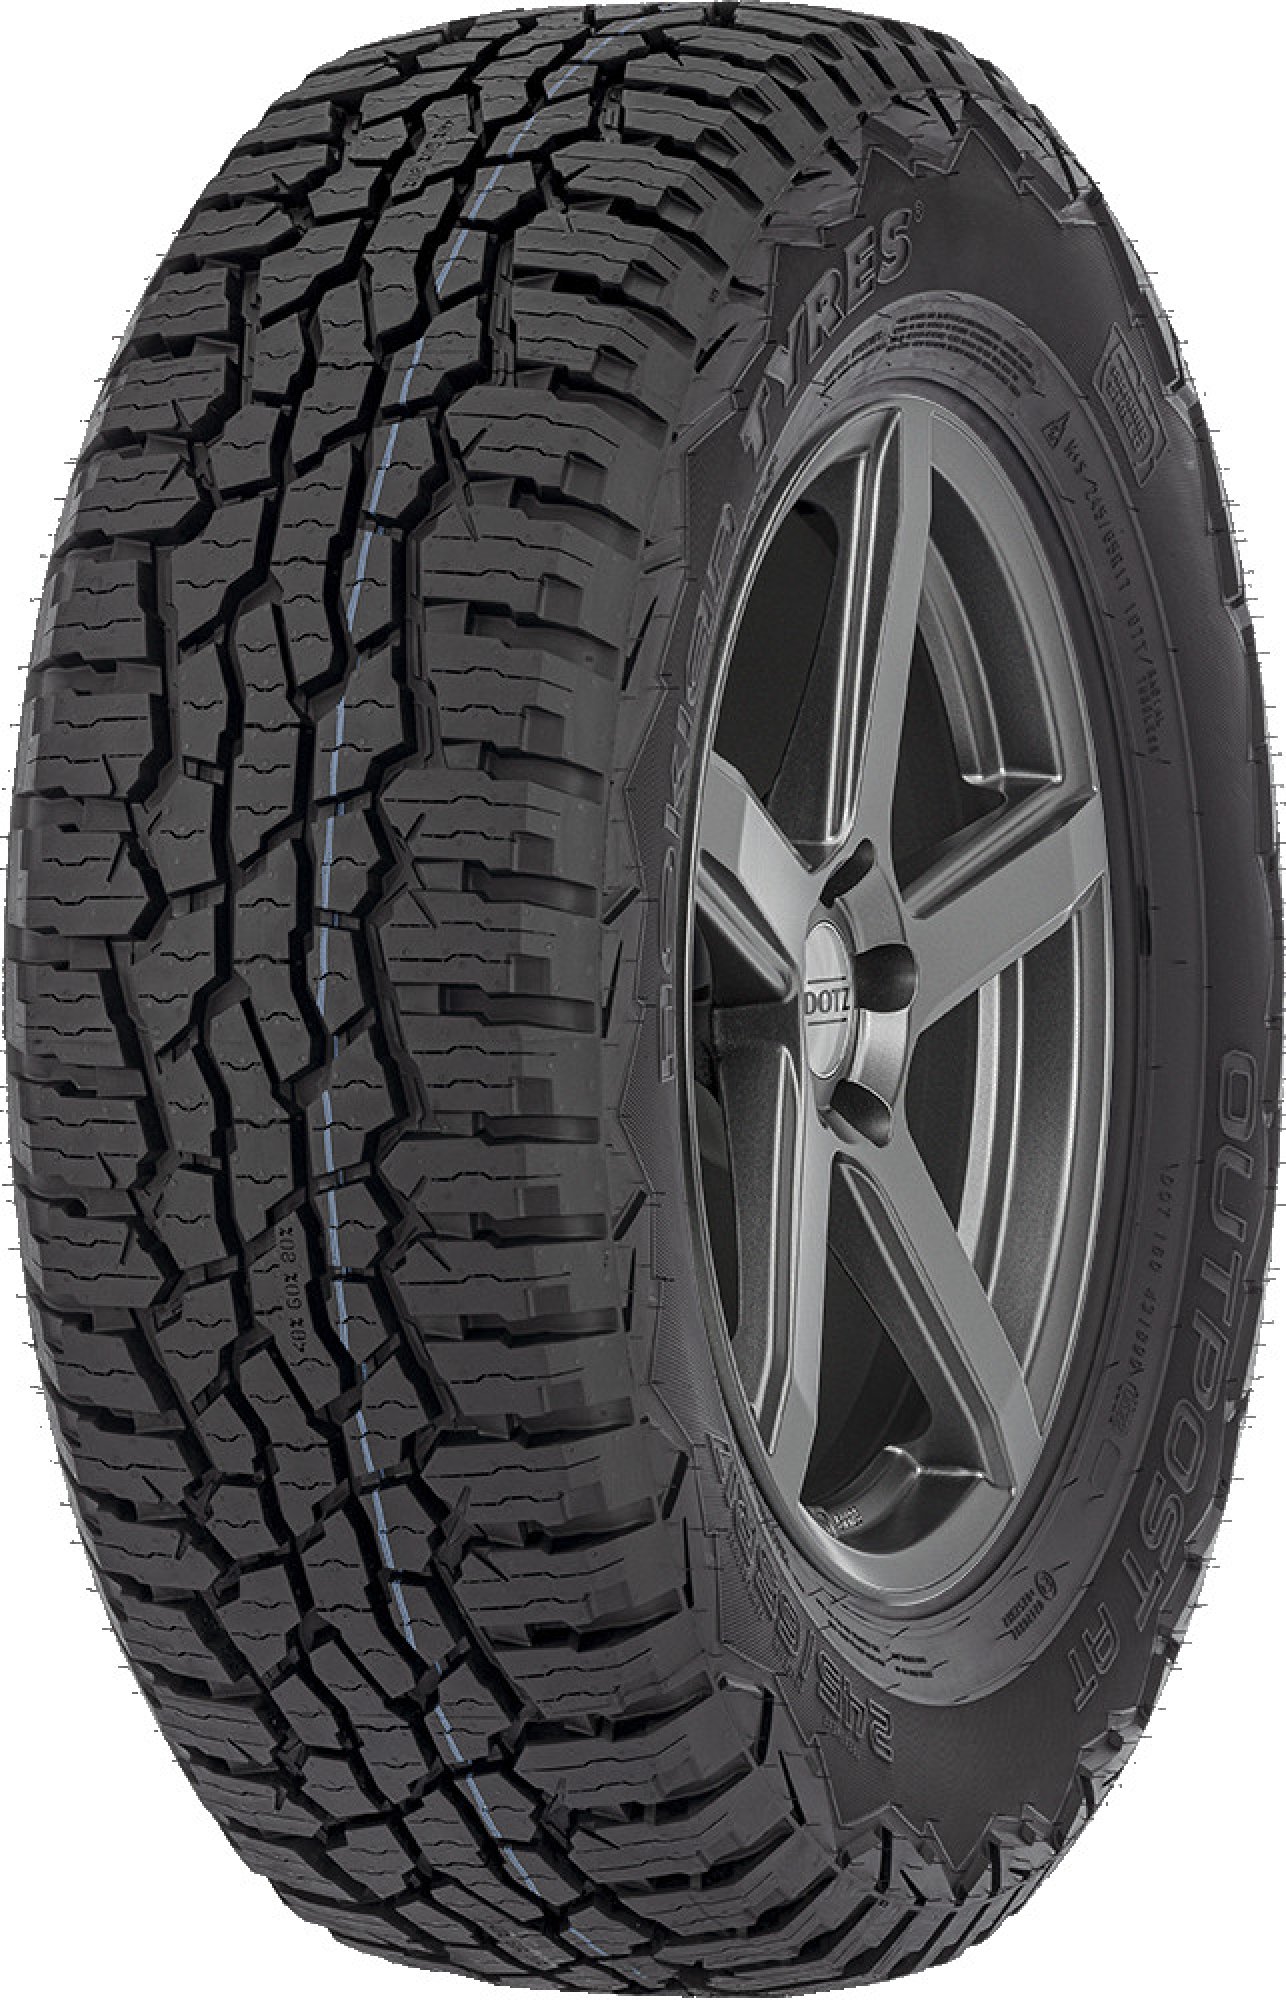 NOKIAN TYRES OUTPOST AT 235/75 R 17 109S